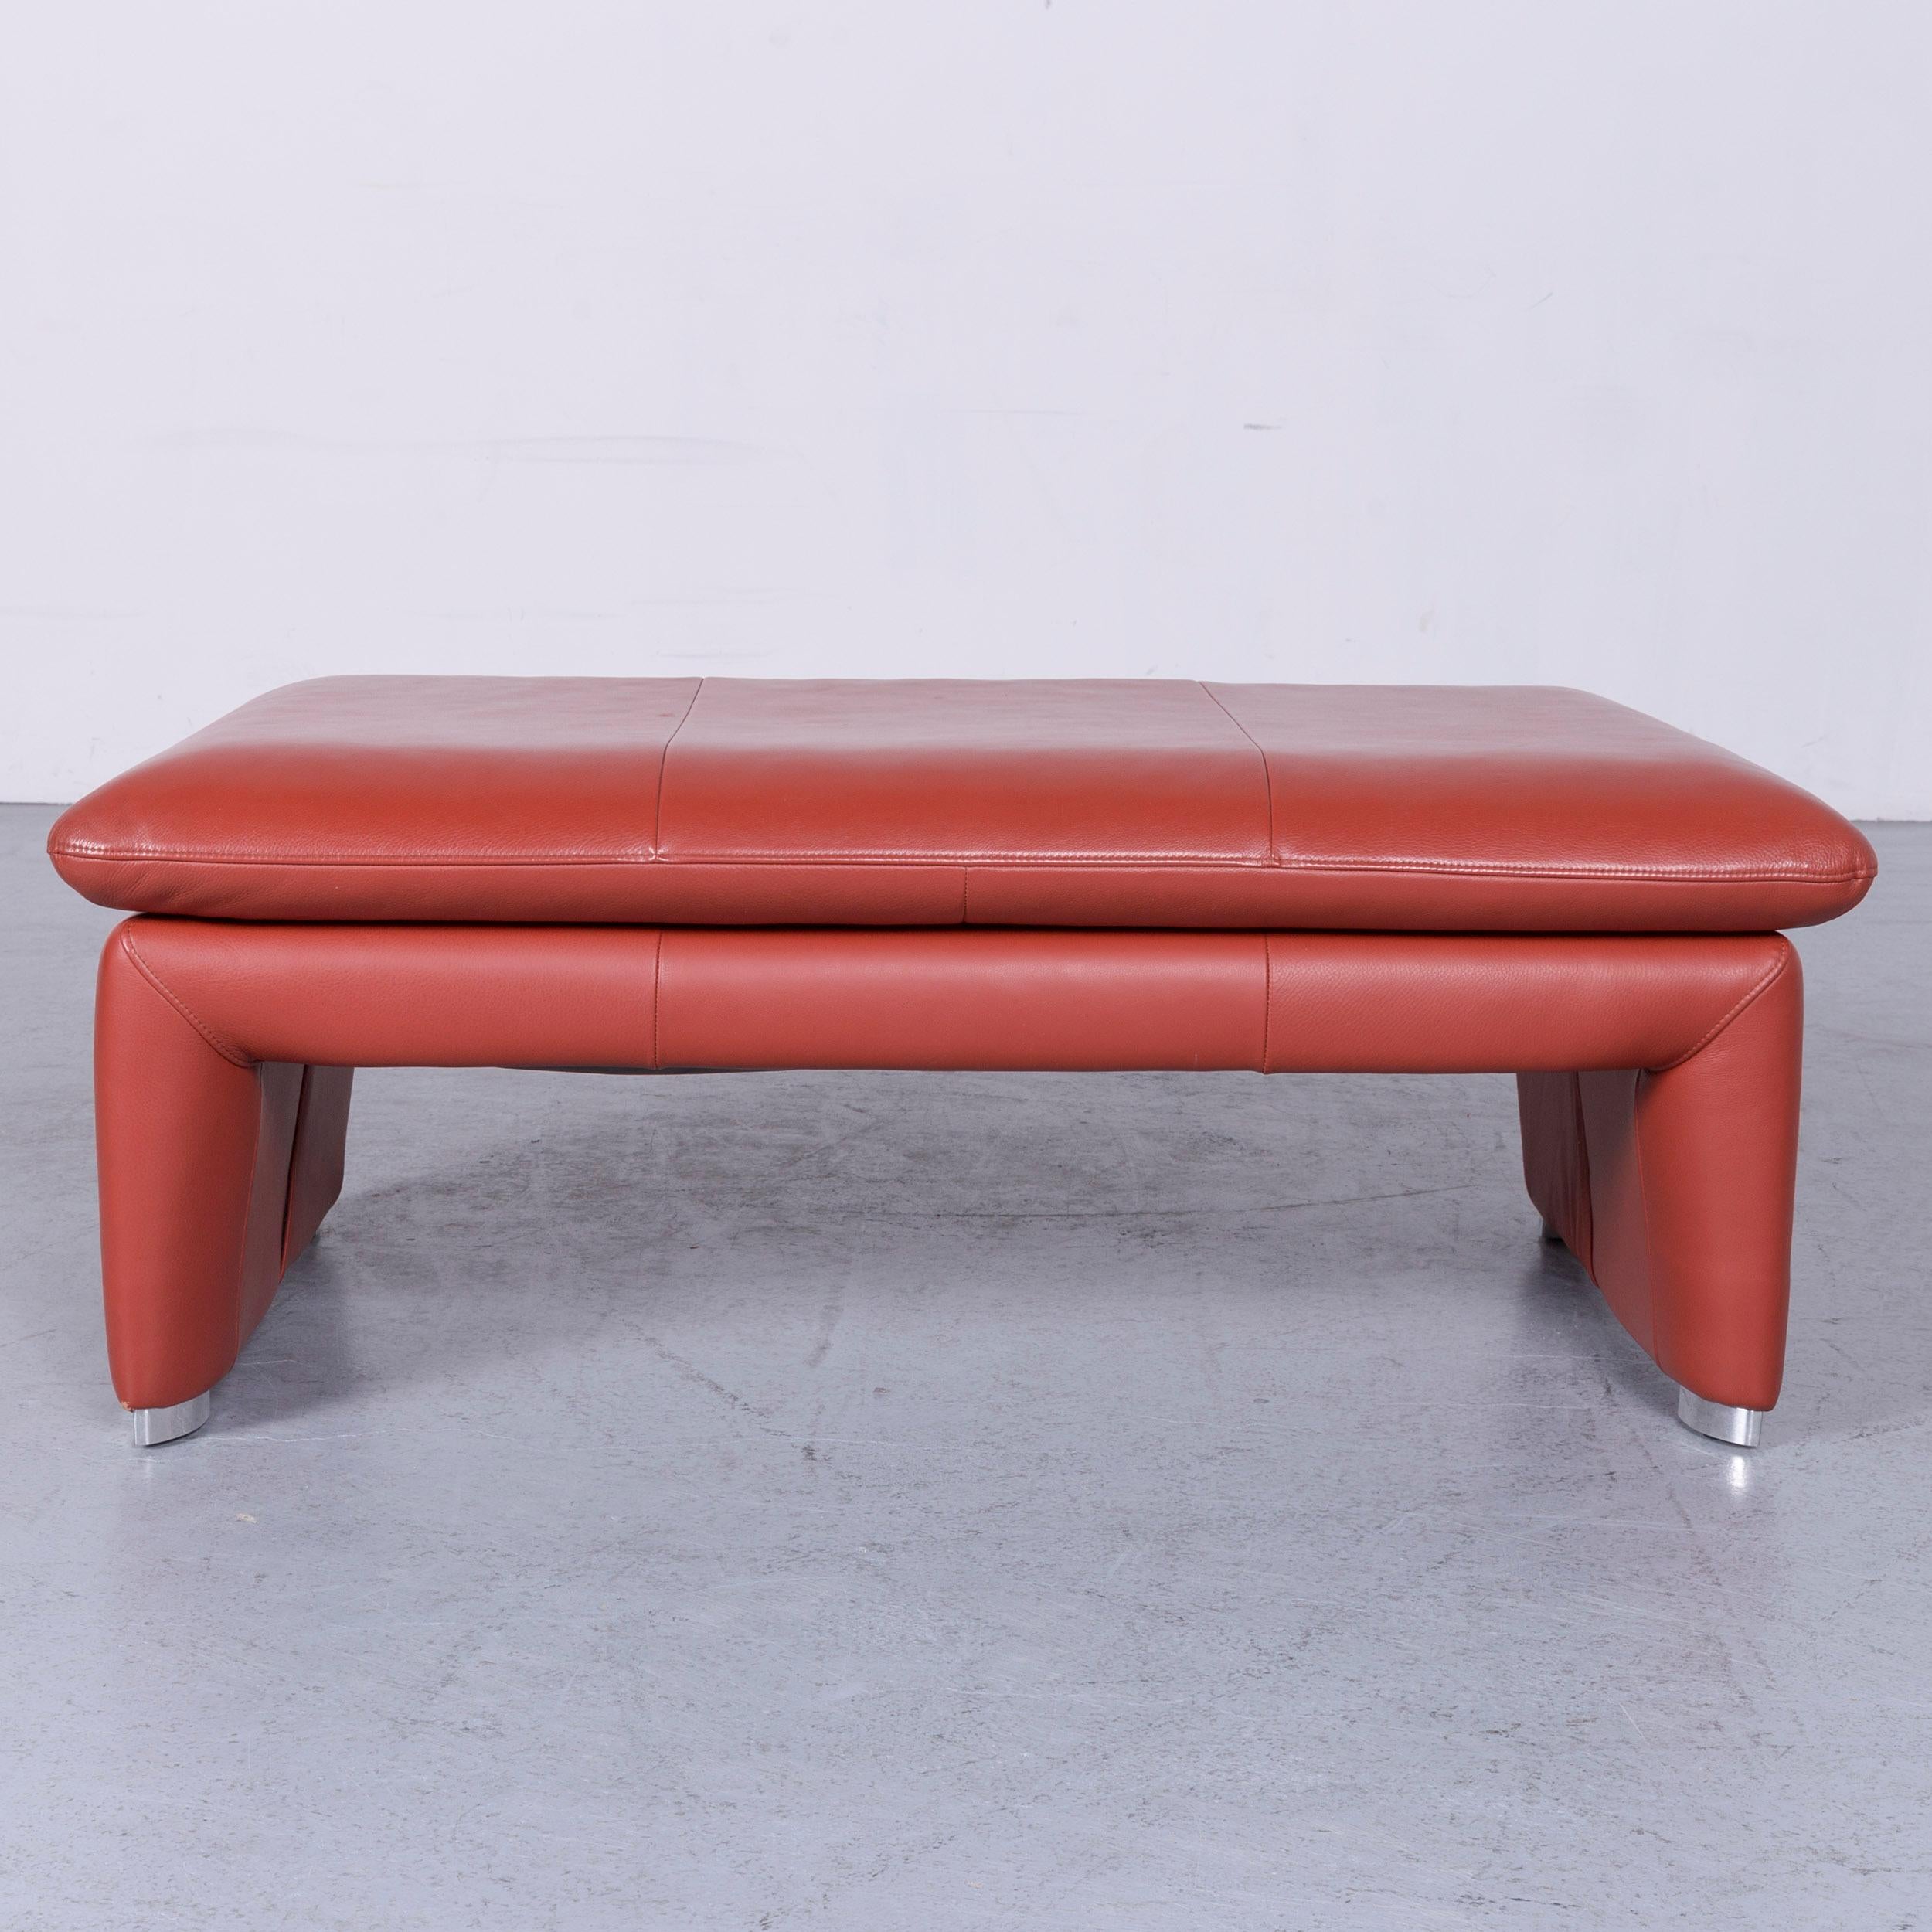 Laauser Corvus Designer Footstool Leather Red One Seat Couch Modern 1